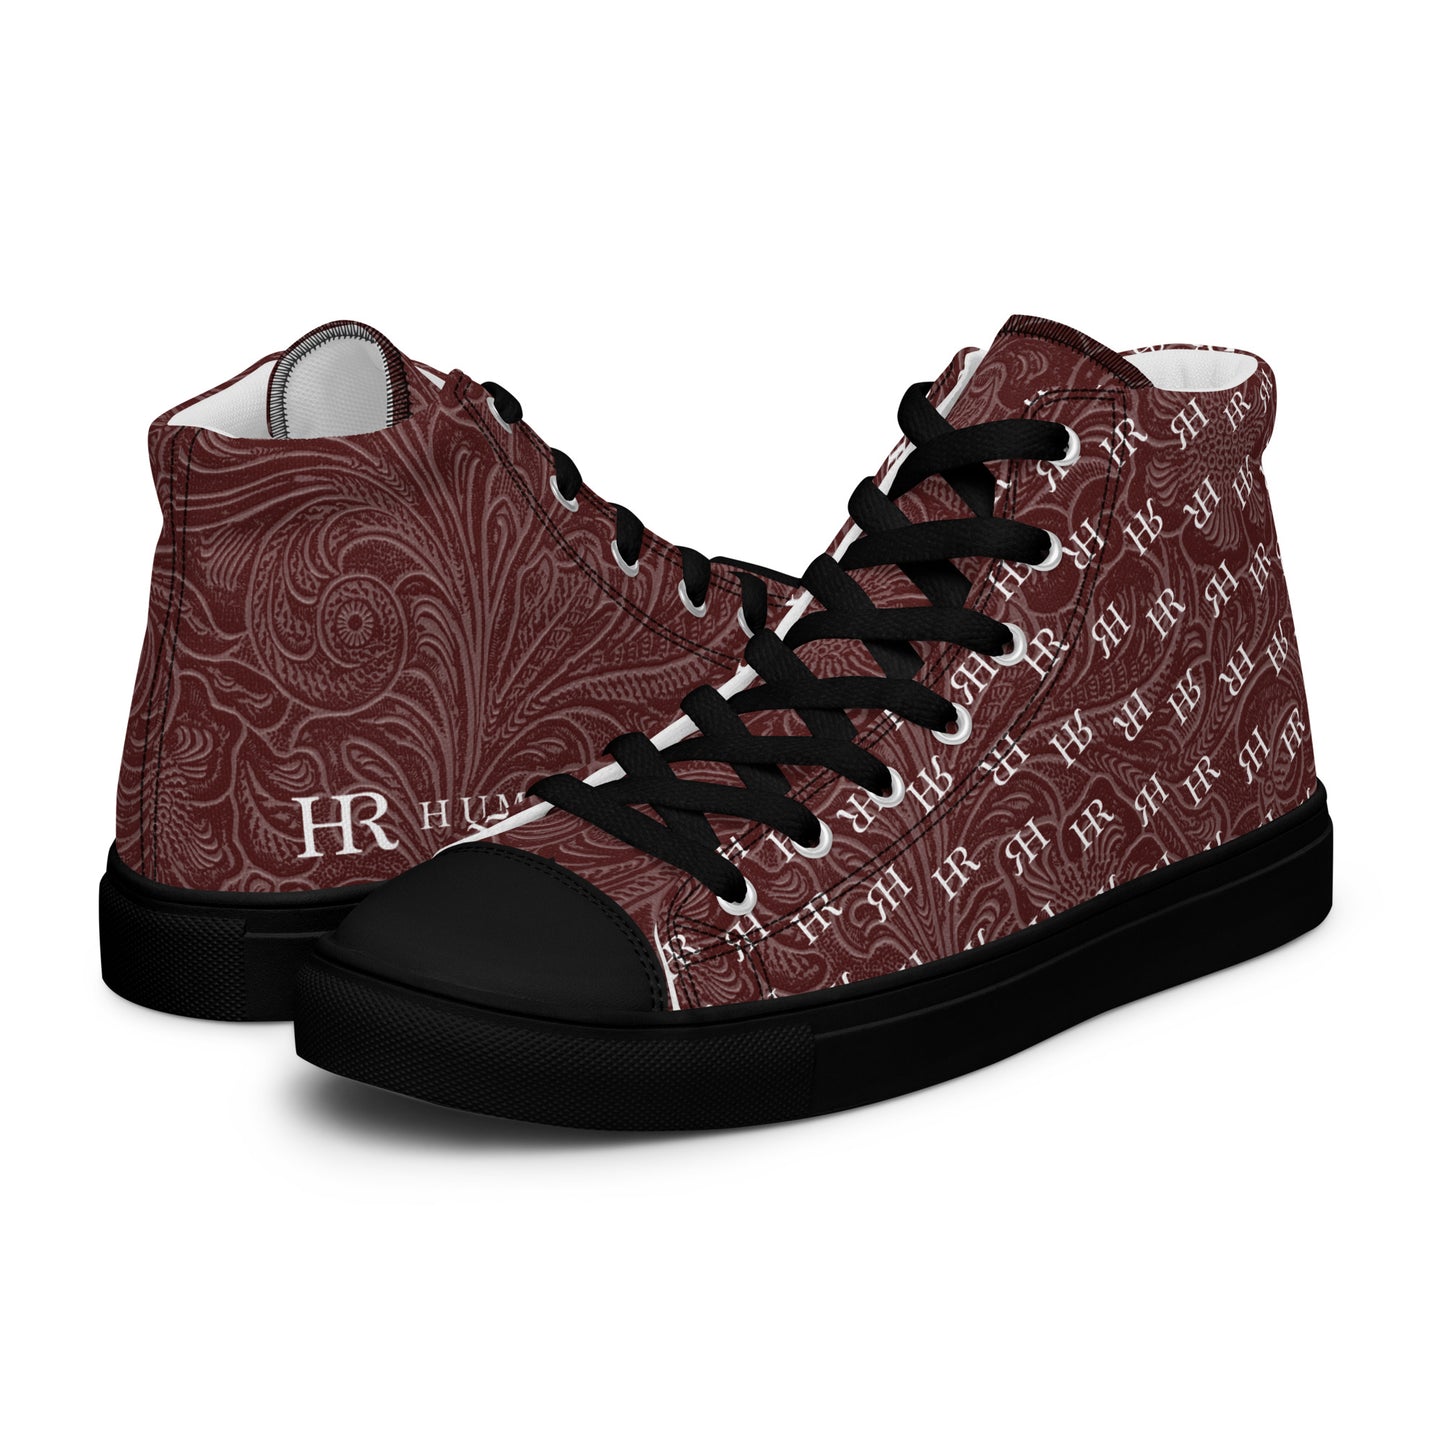 Humareso Team Lead Special Edition - Mens High-Tops